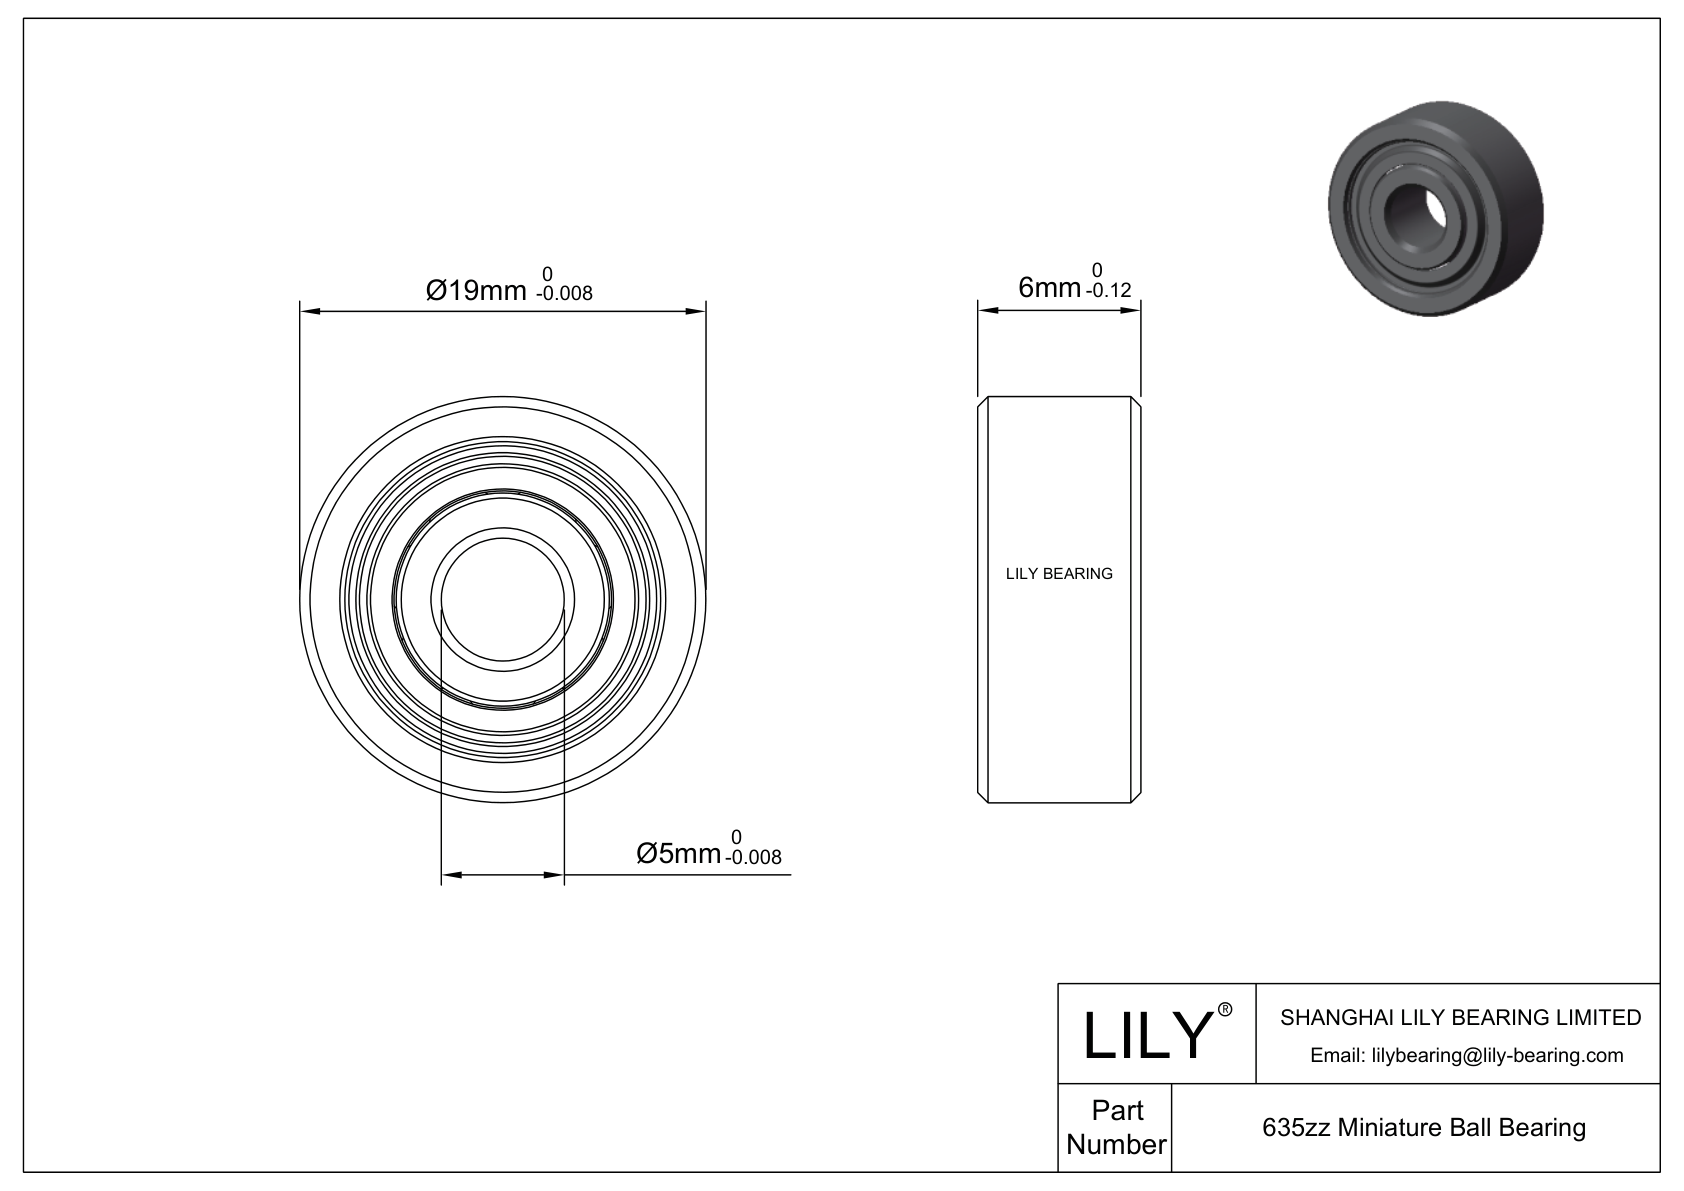 LILY-BST63540-30 Outsourcing POM bearings cad drawing